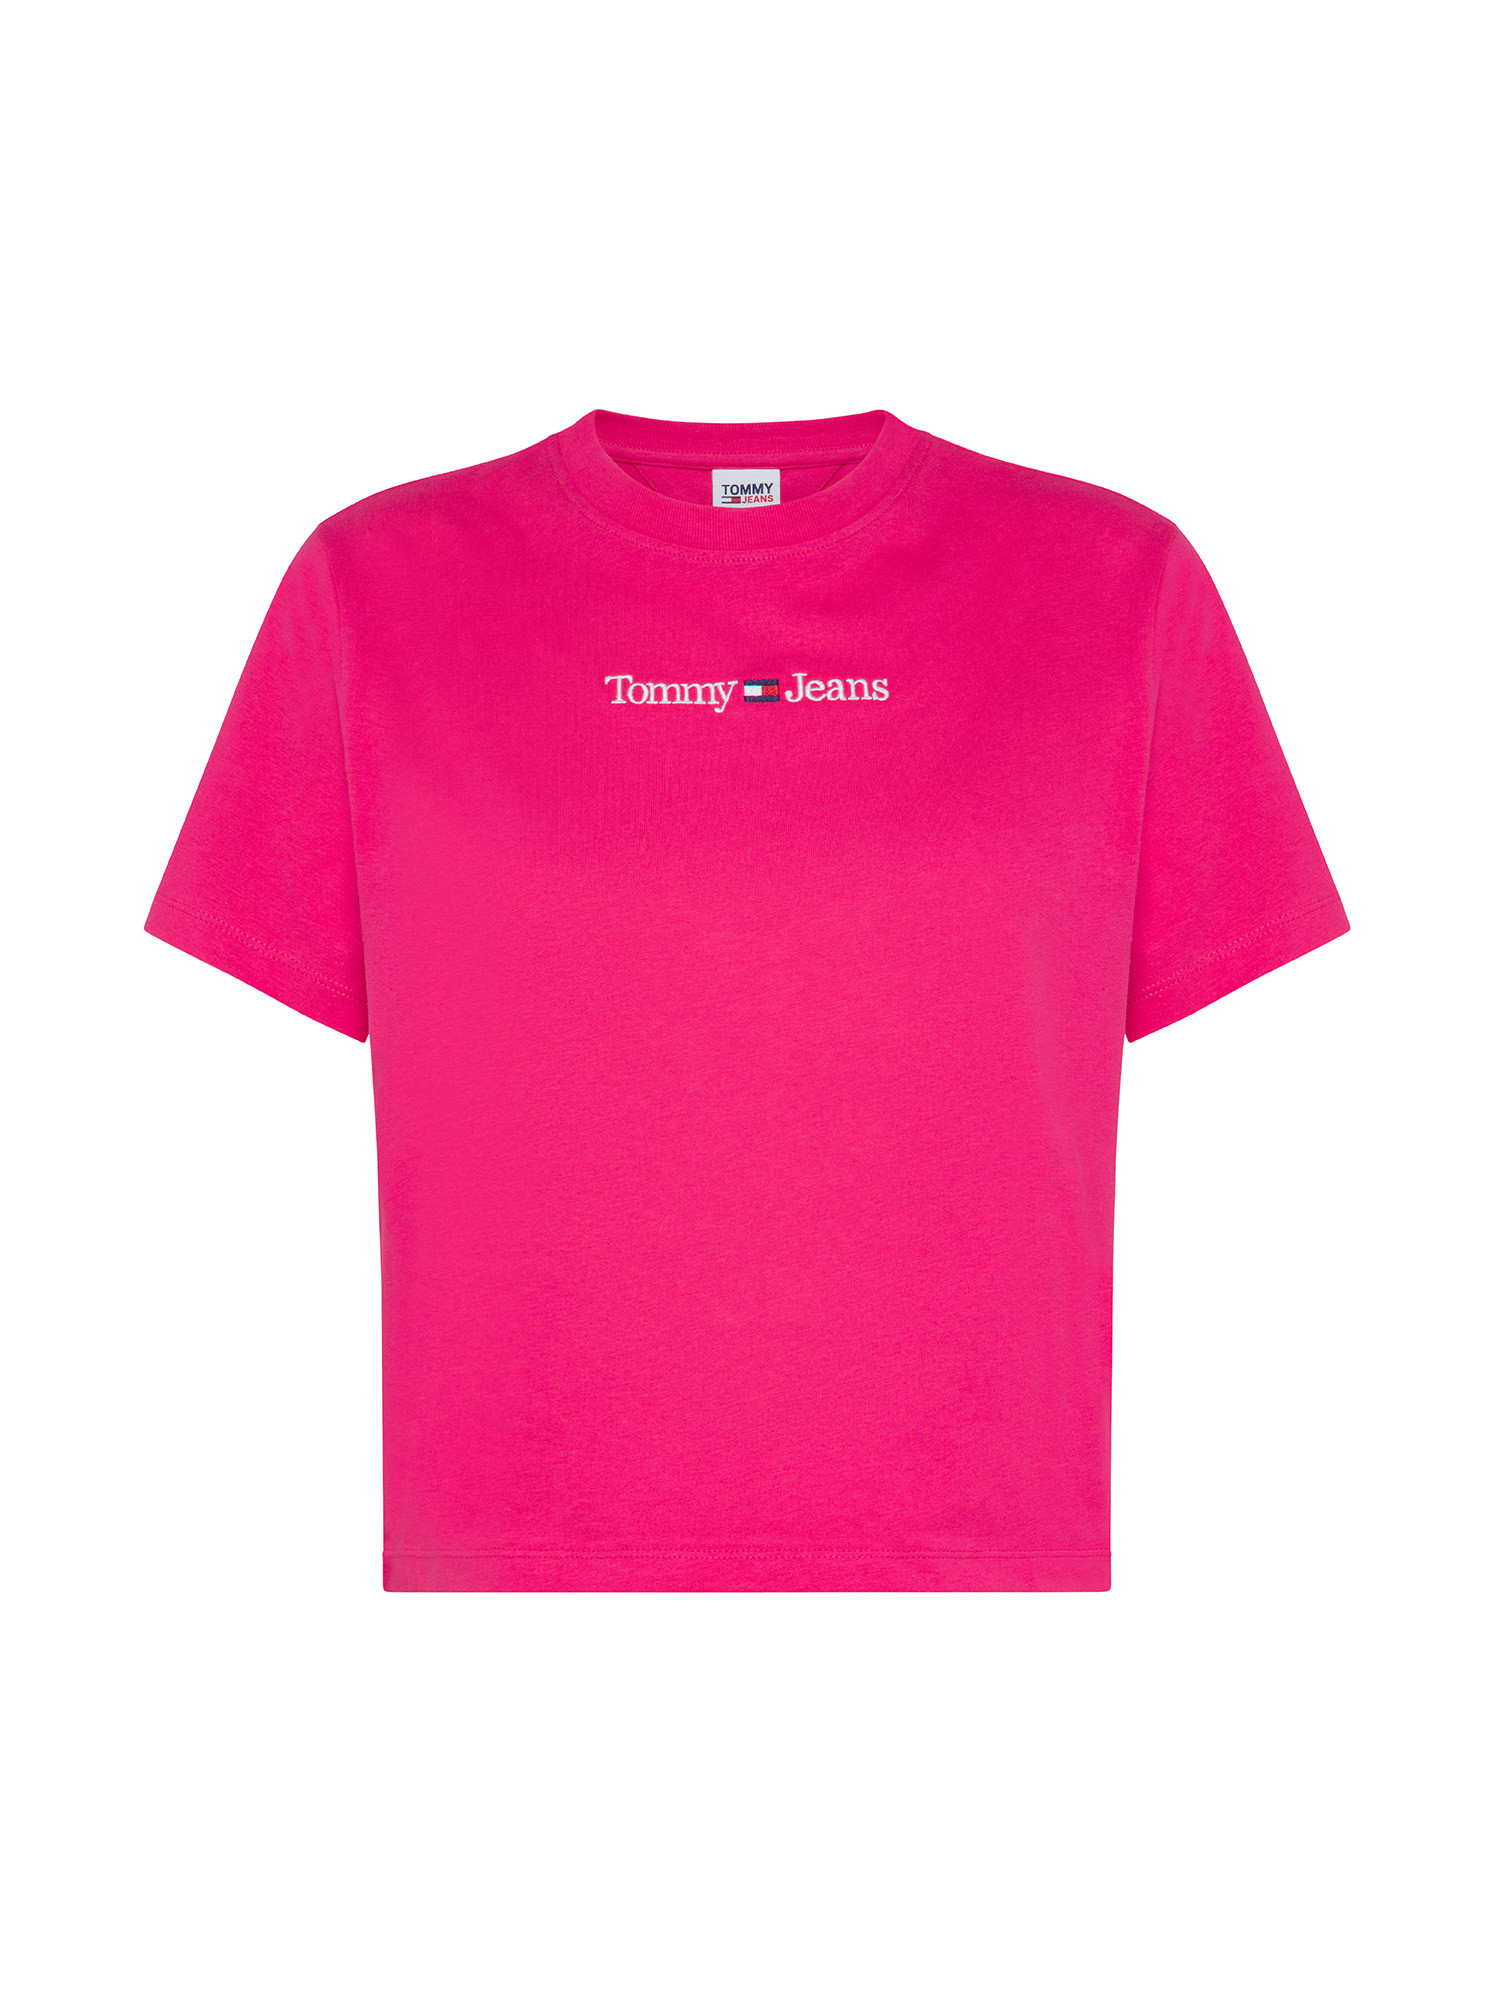 Tommy Jeans - T-shirt con logo ricamato in cotone, Rosa fuxia, large image number 0